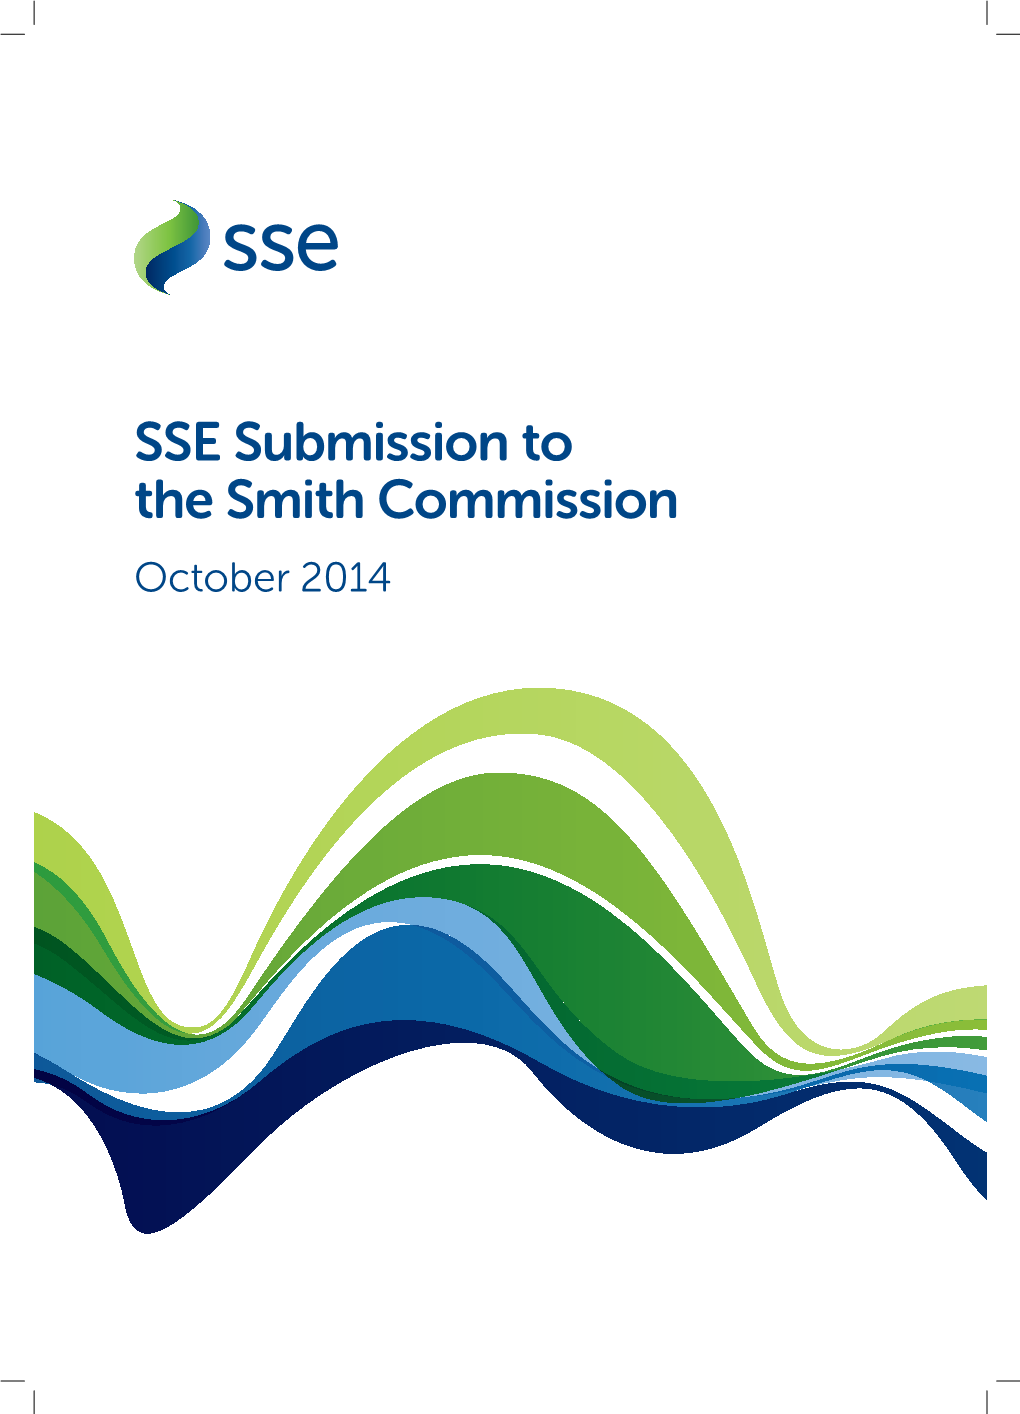 SSE Submission to the Smith Commission.Indd